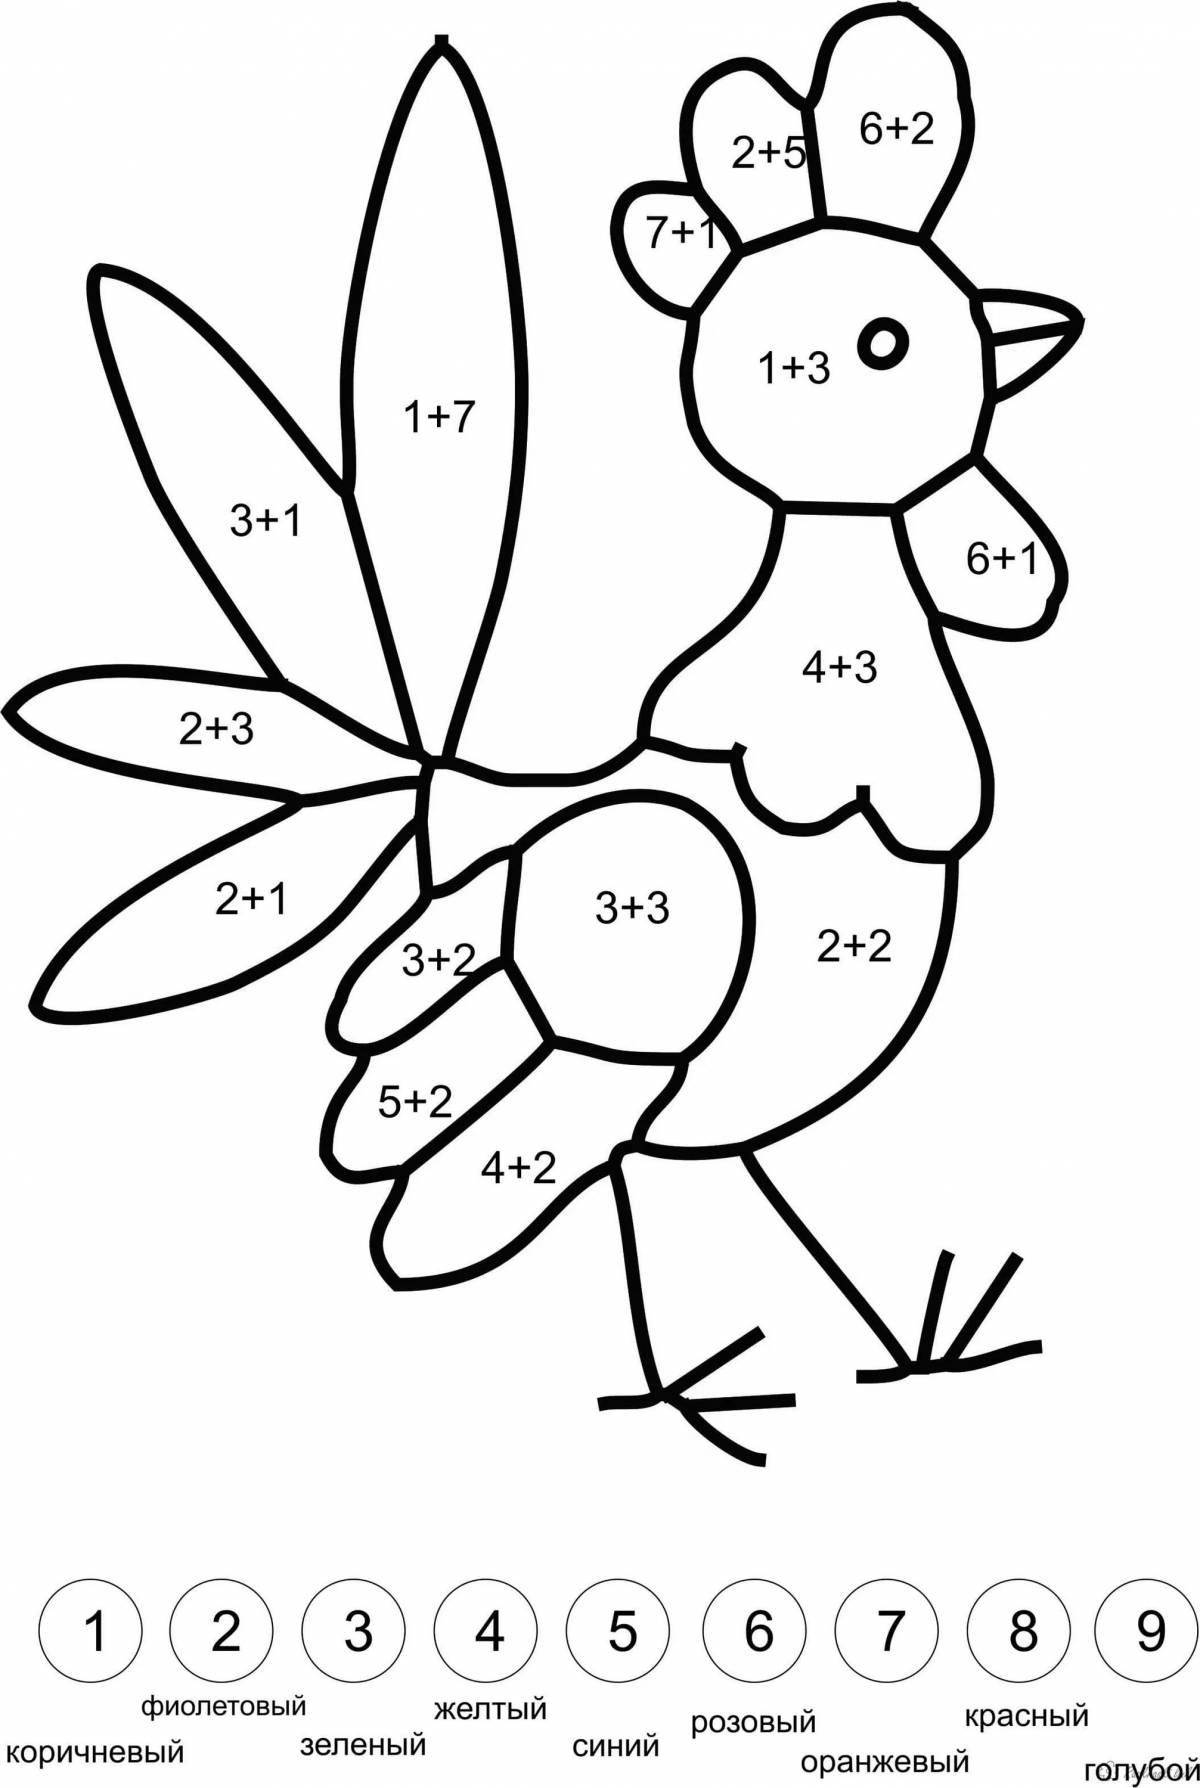 Examples of coloring pages for schoolchildren